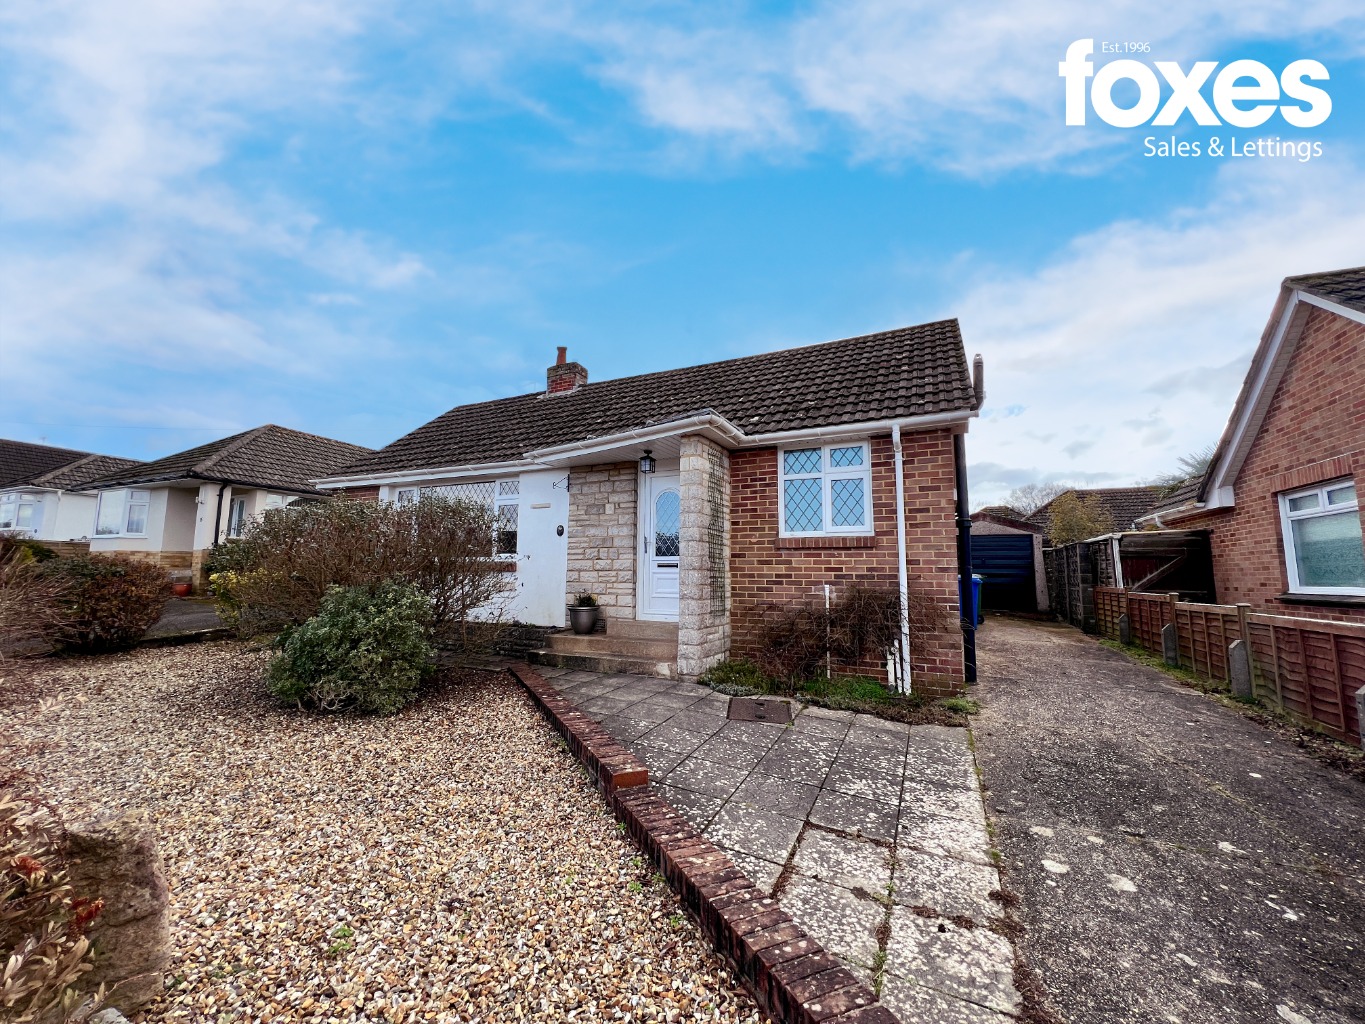 2 bed bungalow to rent in Ullswater Road, Wimborne - Property Image 1